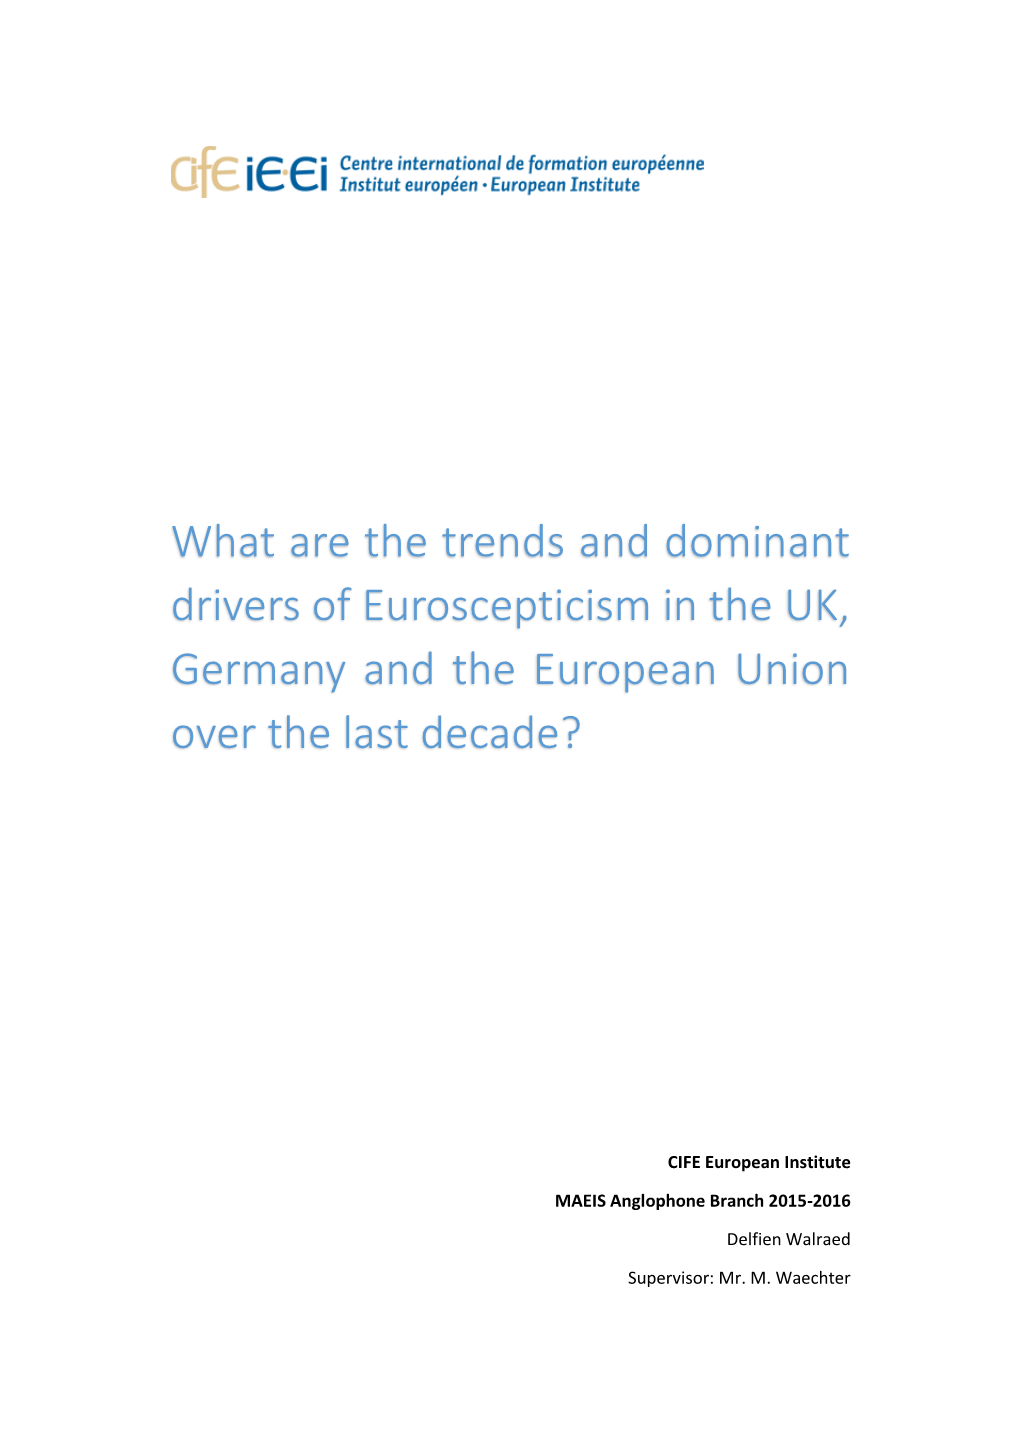 What Are the Trends and Dominant Drivers of Euroscepticism in the UK, Germany and the European Union Over the Last Decade?